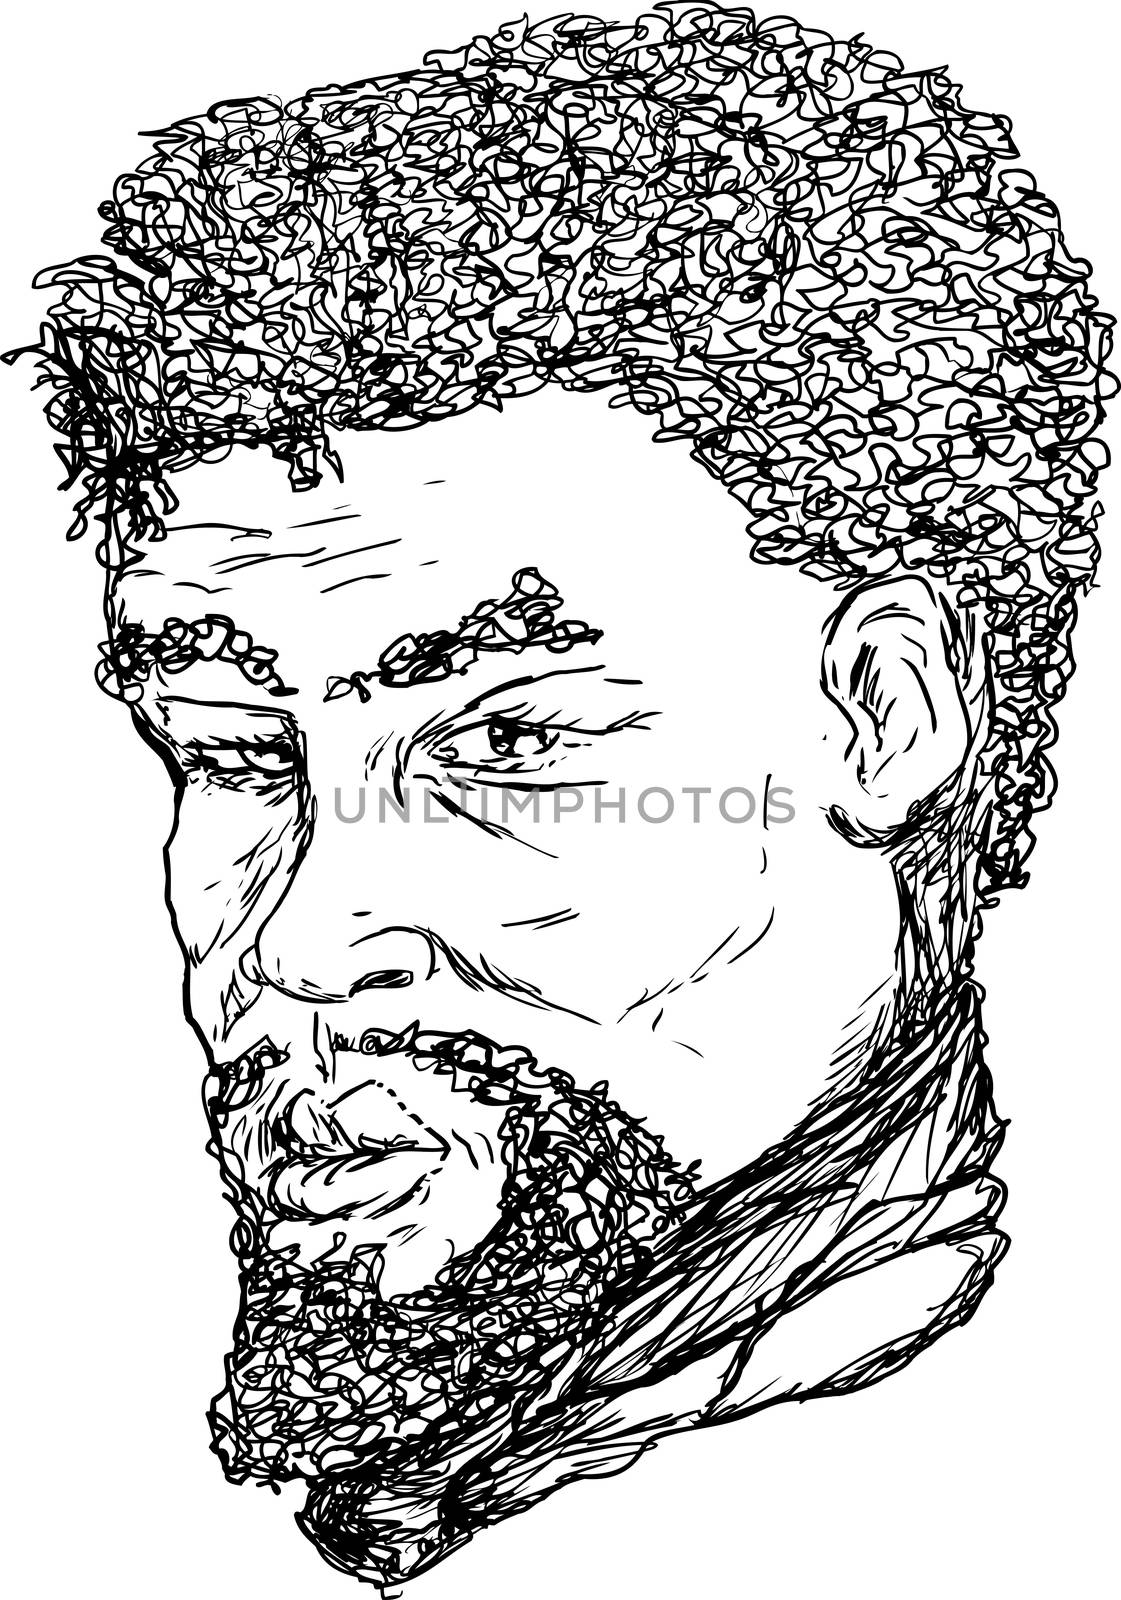 African Man Outline by TheBlackRhino